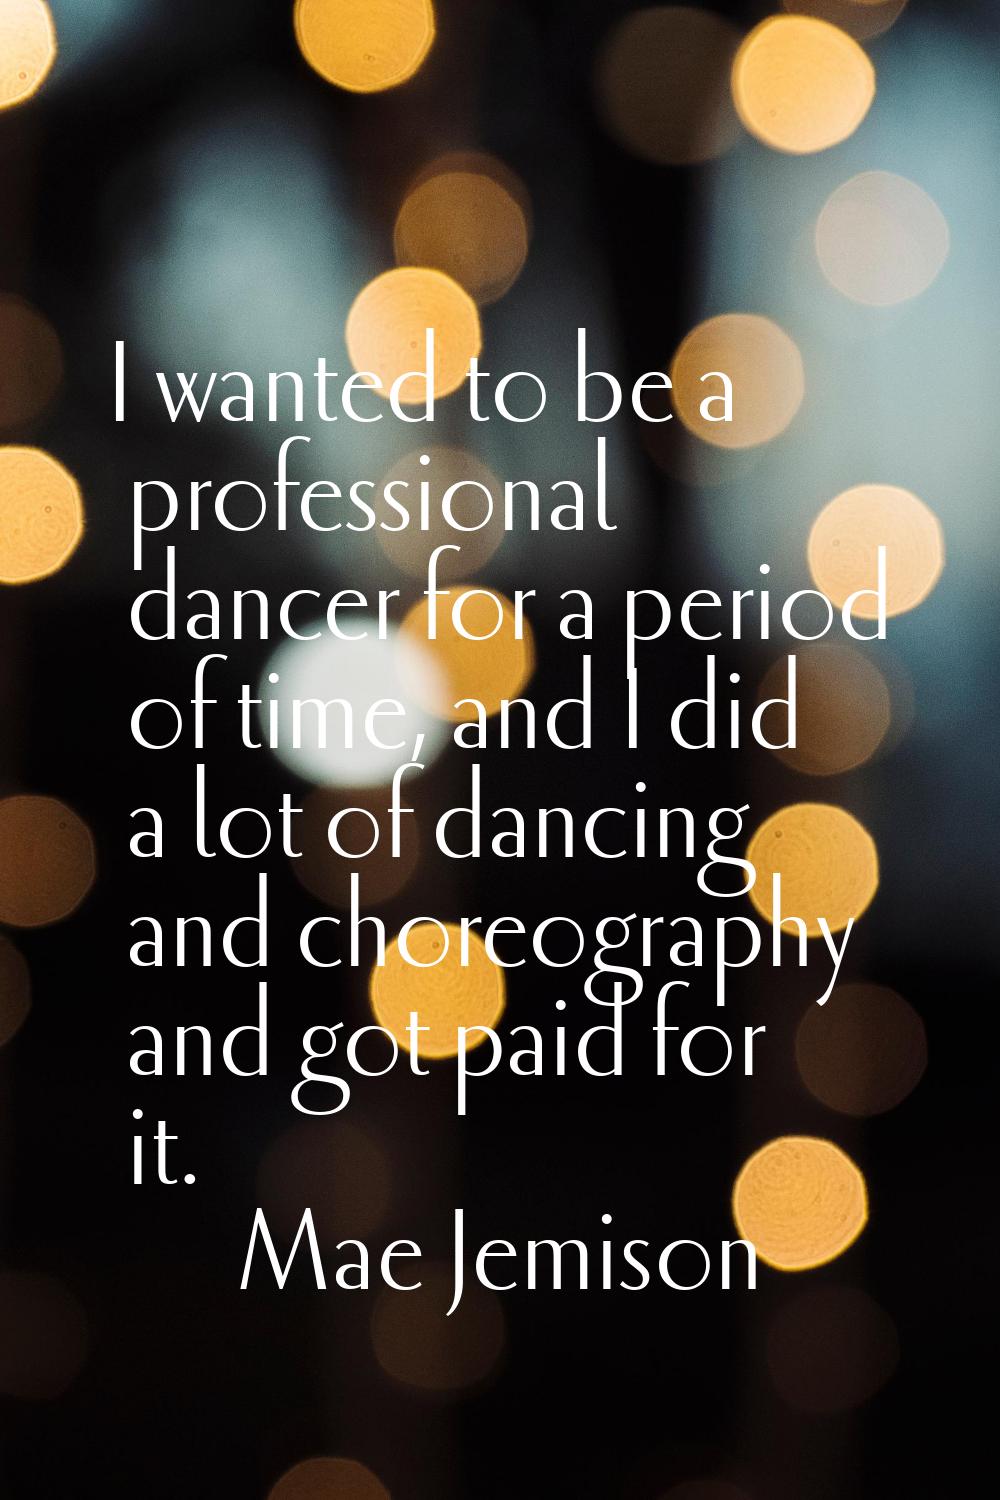 I wanted to be a professional dancer for a period of time, and I did a lot of dancing and choreogra